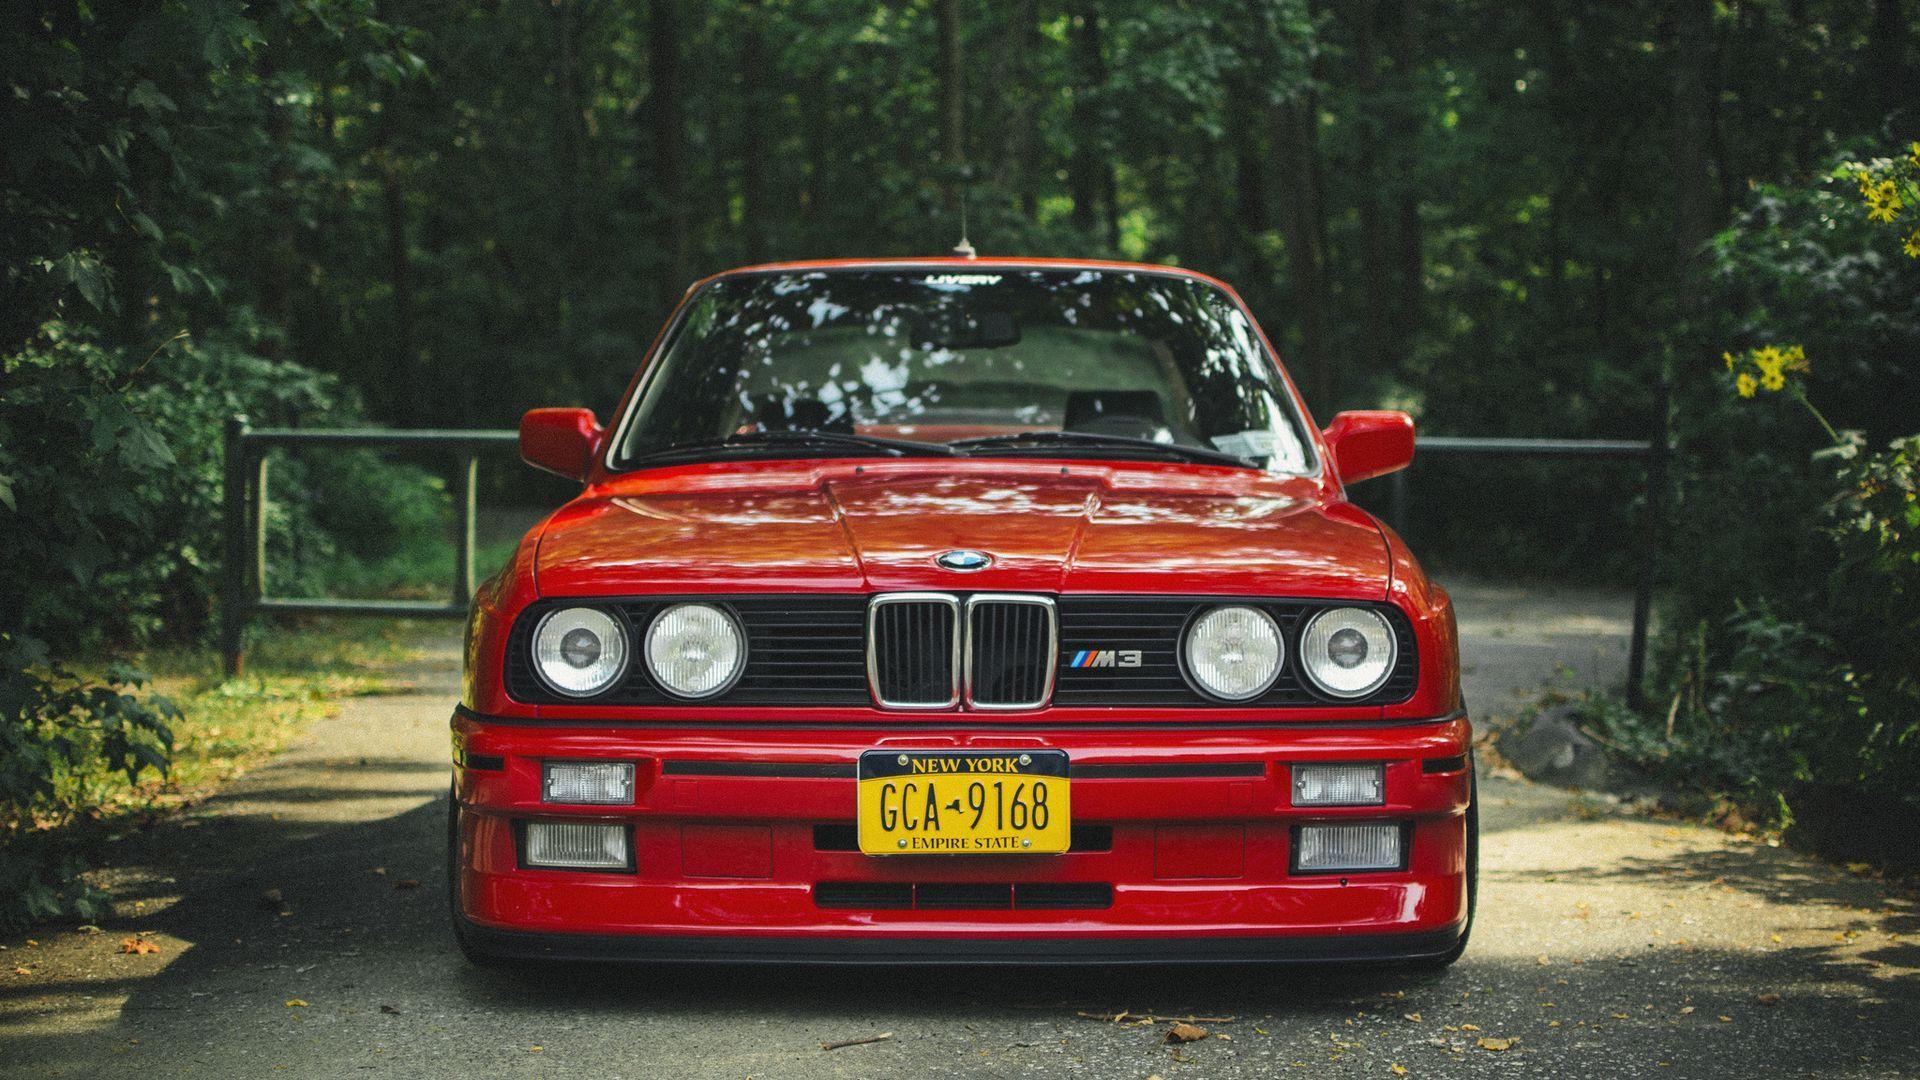 E30 Bmw M3 Pictures  Download Free Images on Unsplash